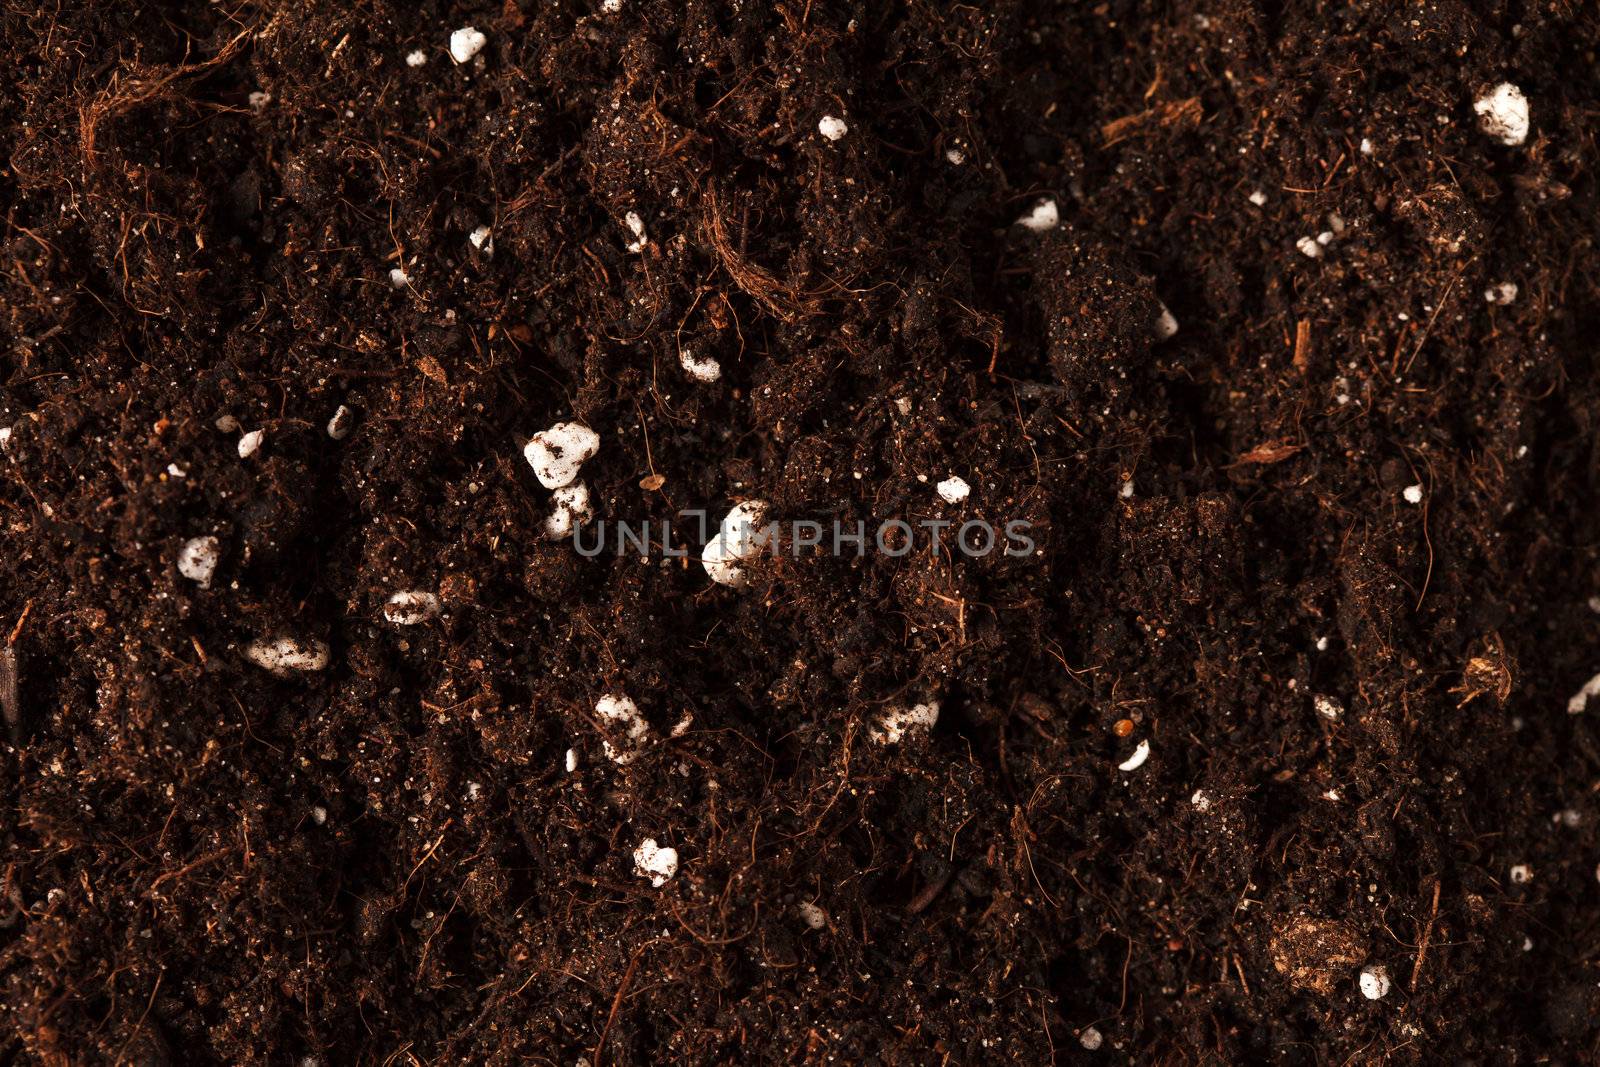 Soil on the white by shebeko